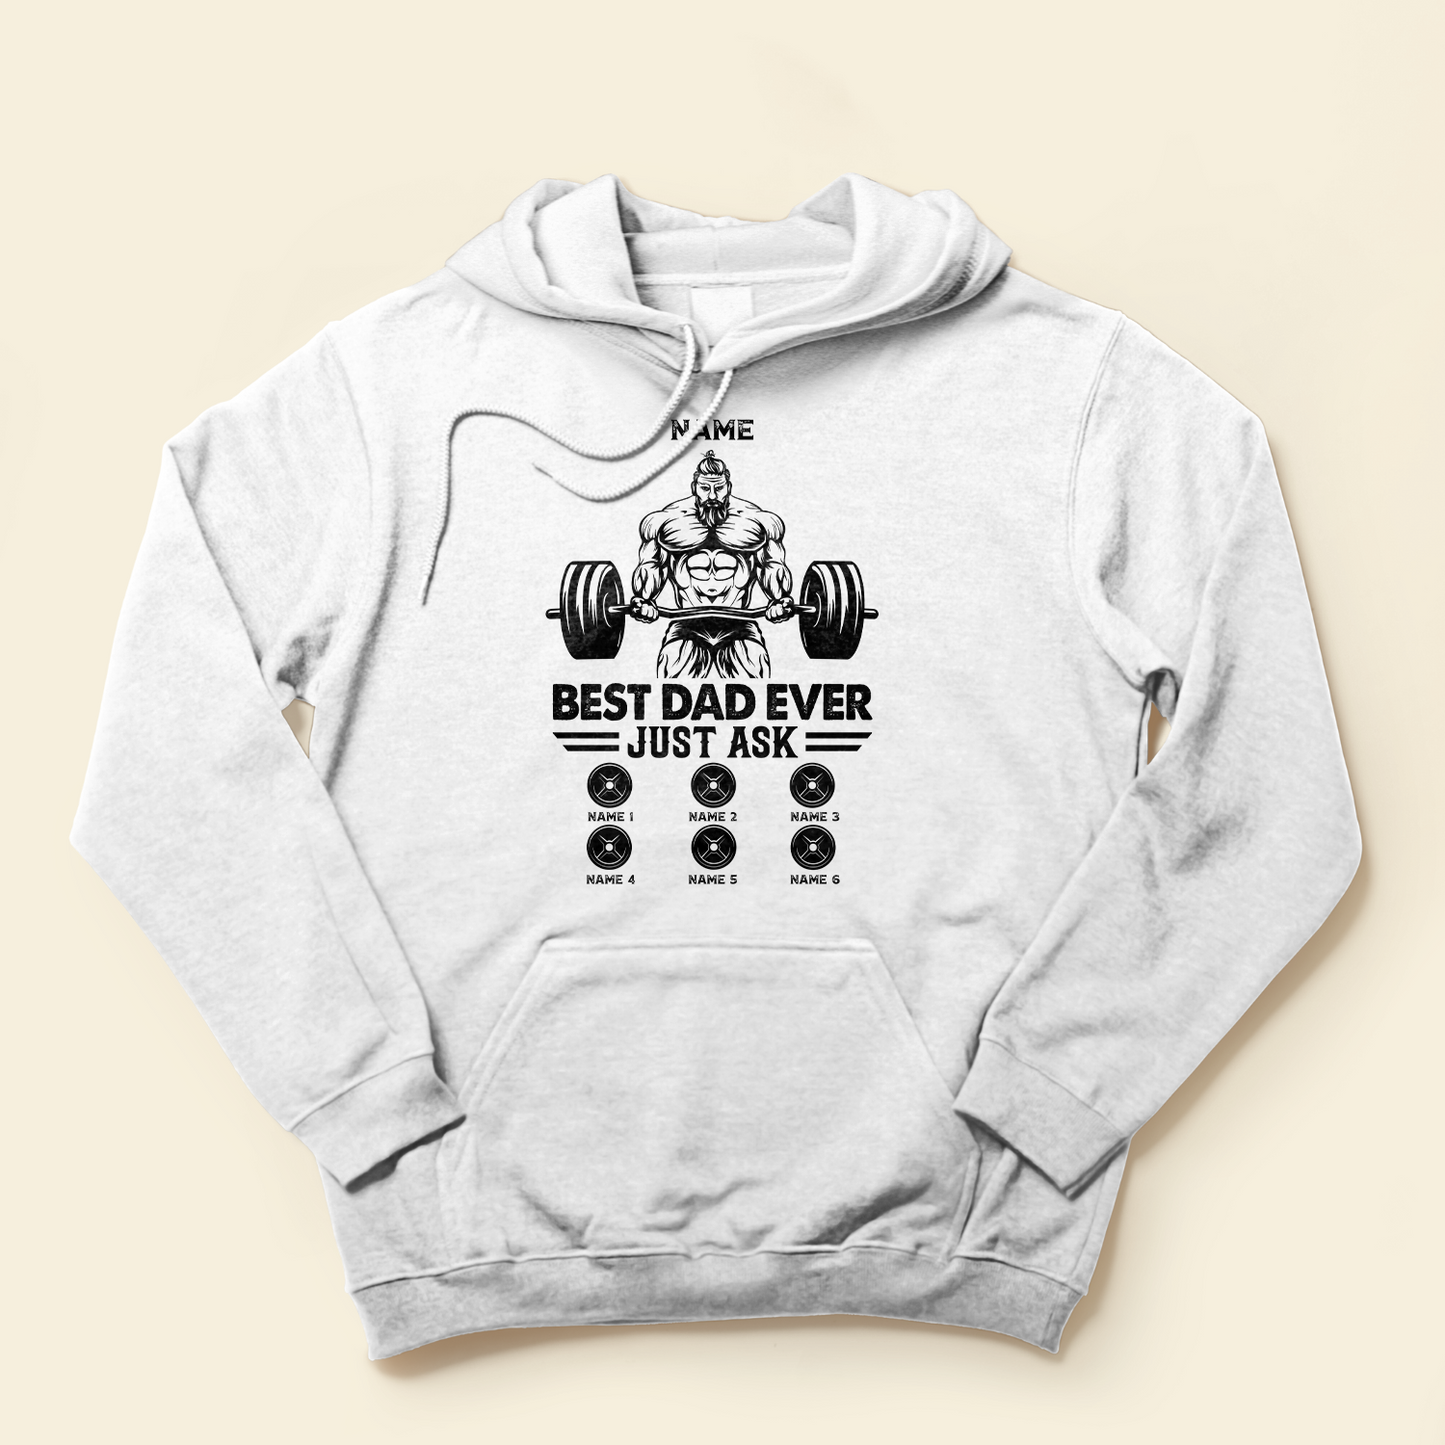 Best Dad Ever Just Ask - Personalized Shirt - BirthdayGift For Gymer - Old Man Lifting